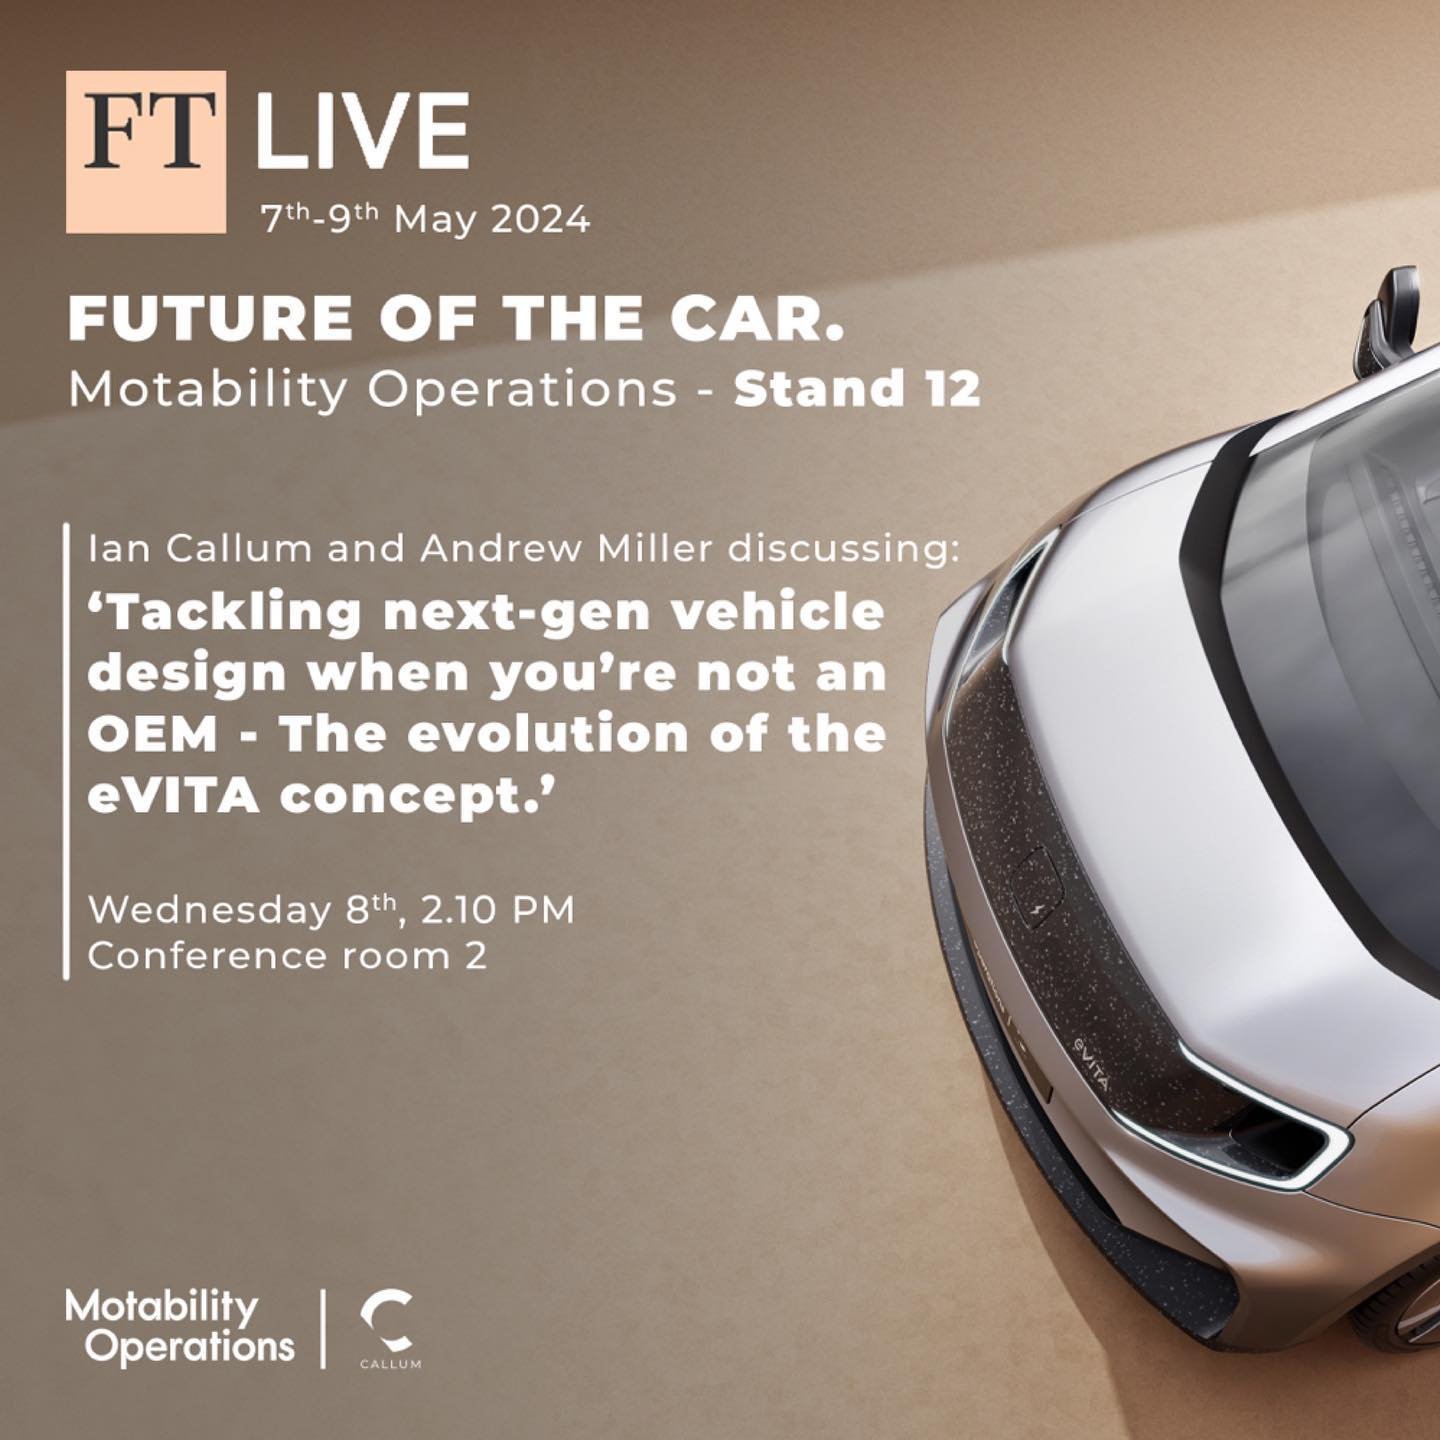 FT Live! CALLUM and Motability Operations will be at the FT Future of the Car event from 7 - 9 May. We will be positioned at Stand 12, ready to discuss the future of mobility, eVITA, and the importance of inclusive design and engineering.

Don't miss